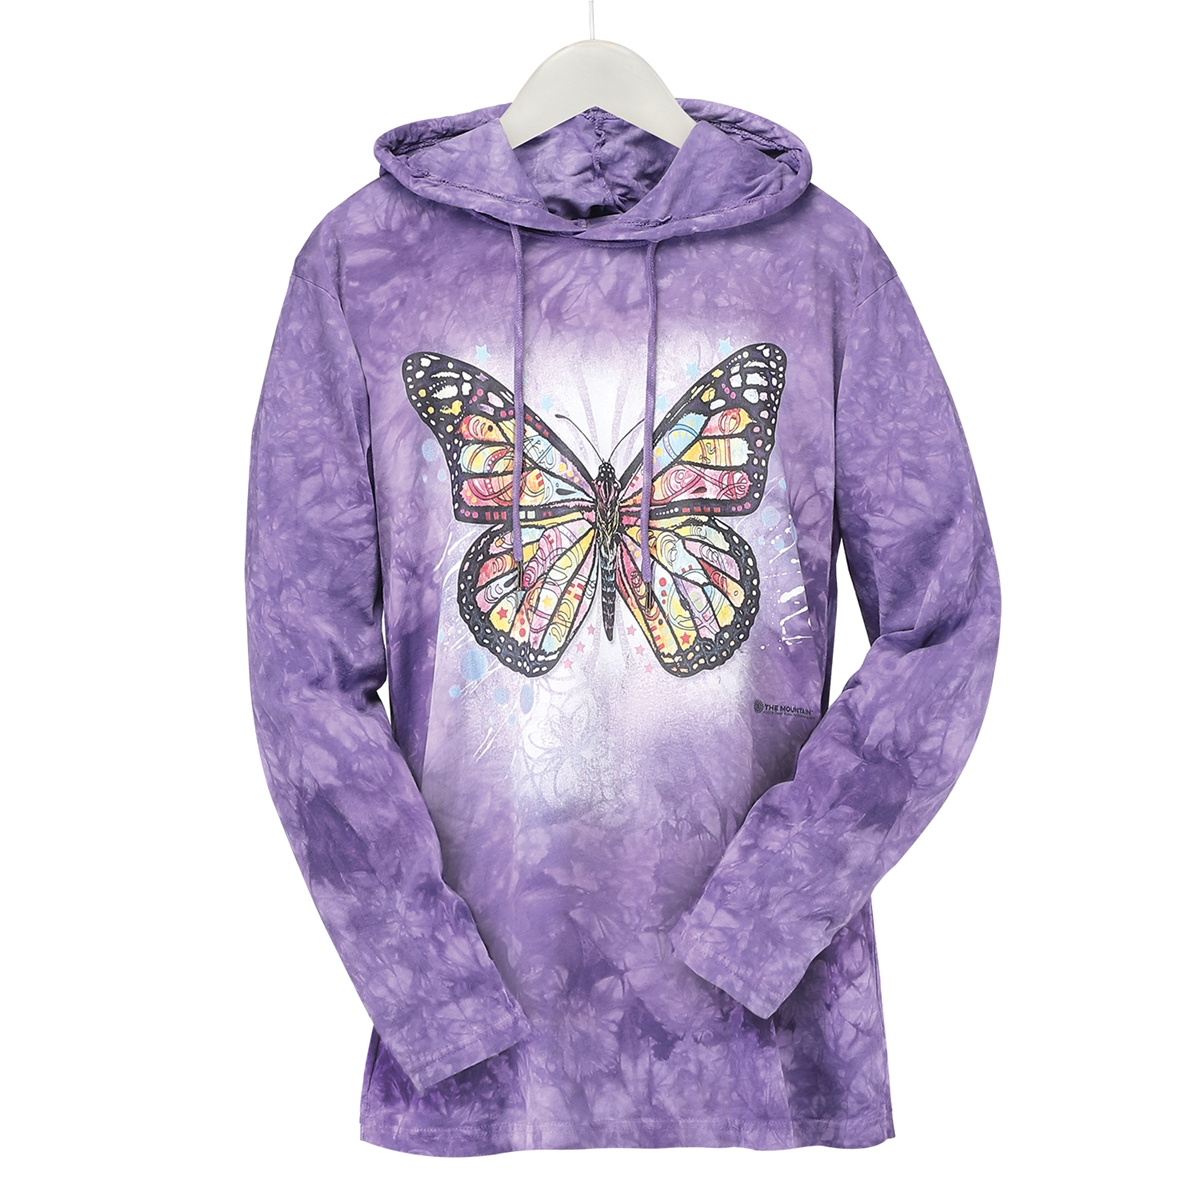 Brilliant Butterfly Hooded Tee